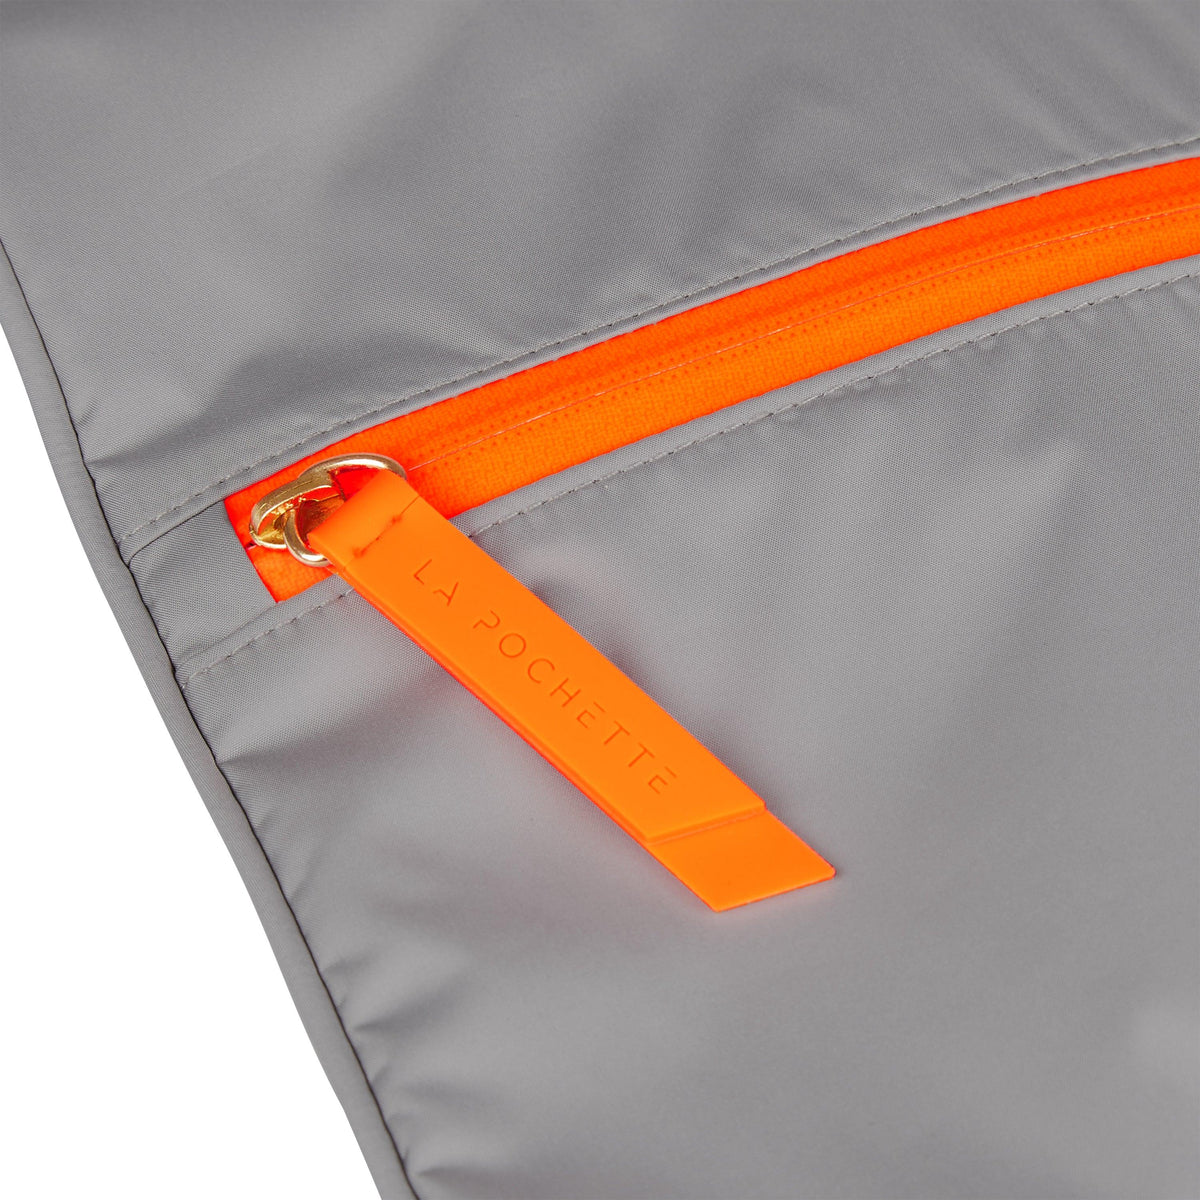 Rear view of Small wet bag in Shadow Neon Orange colourway showing back zip detail